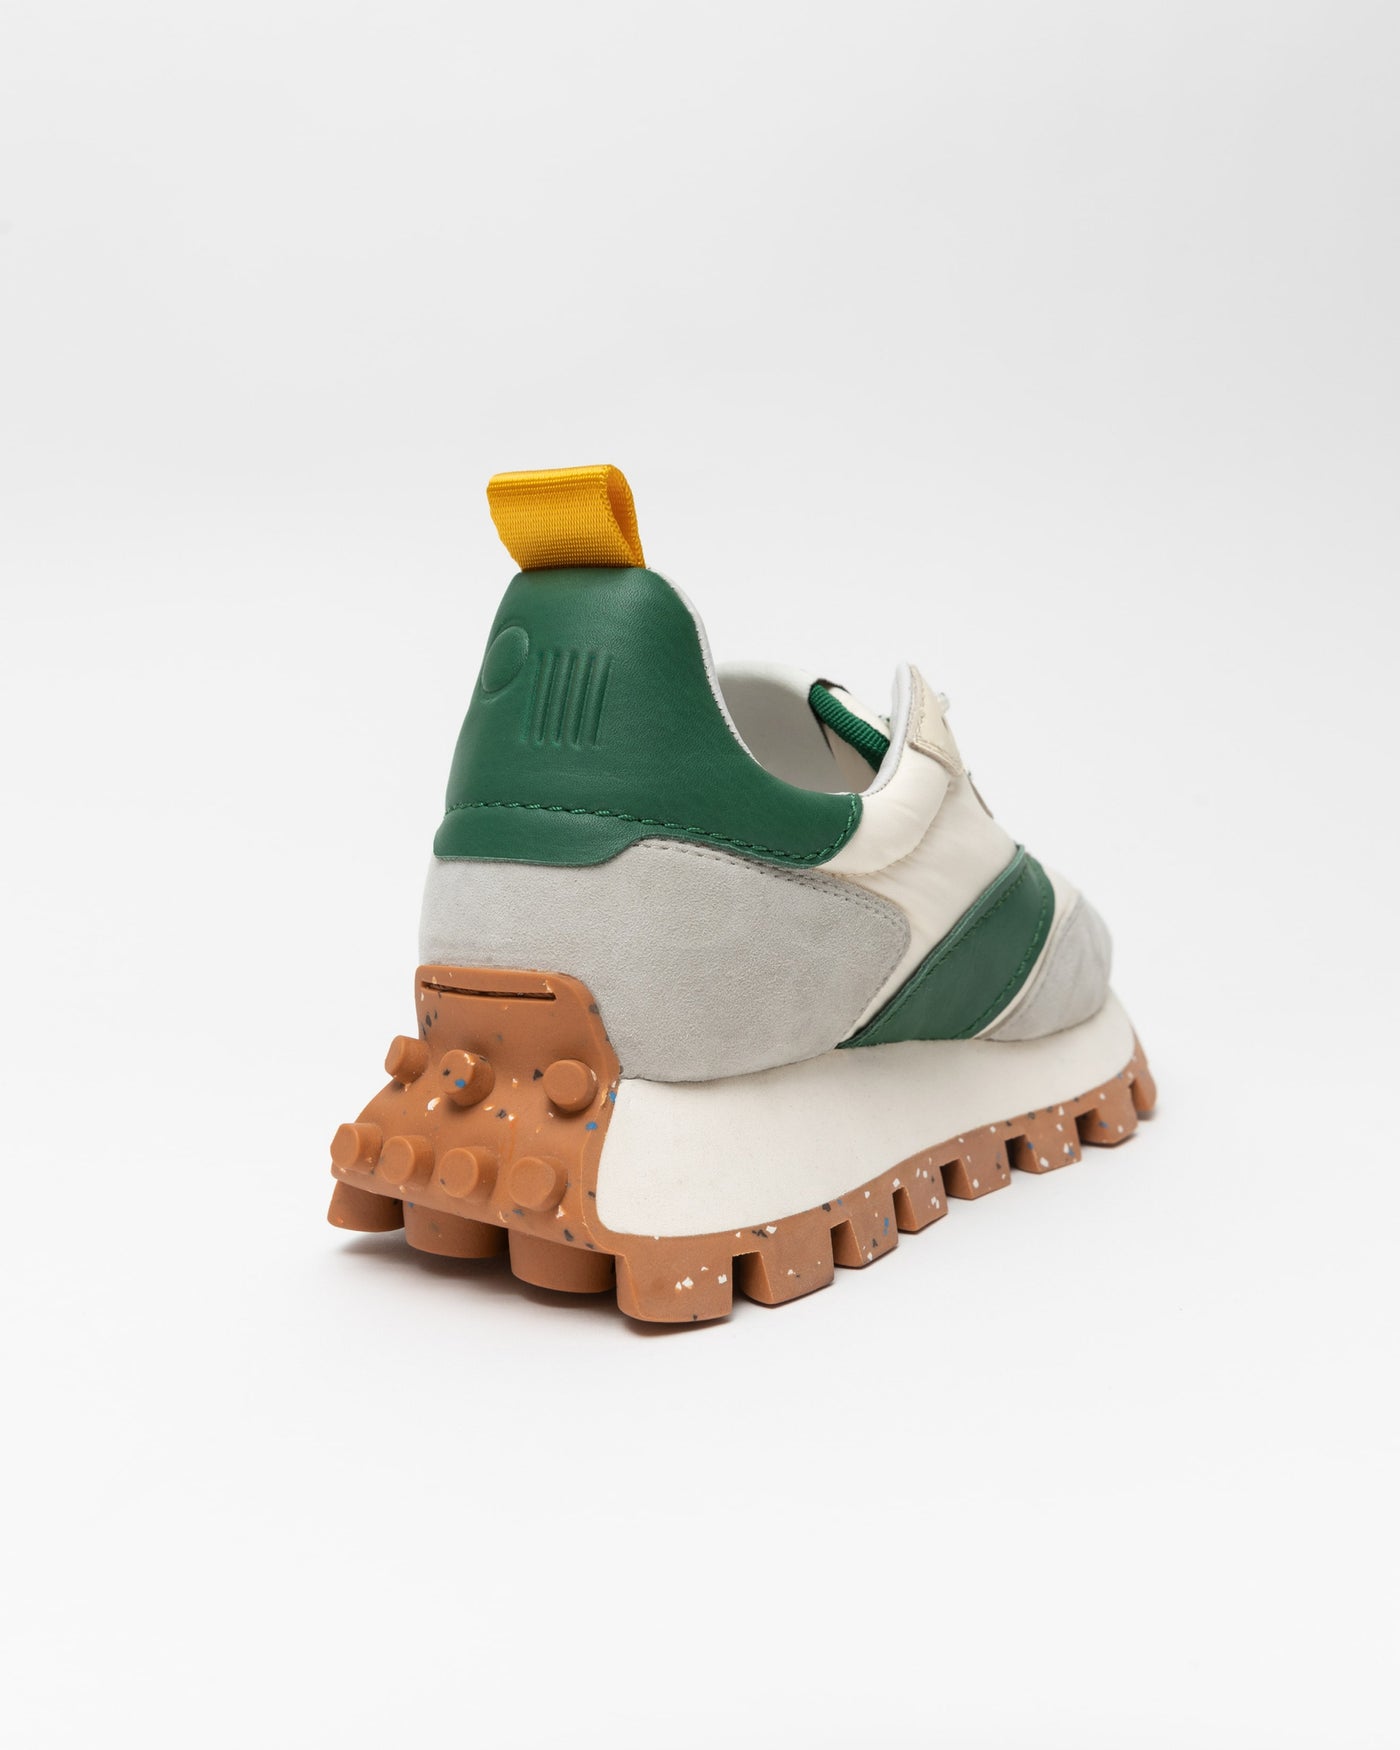 Osaka Ivory/Green Sneaker by Oncept